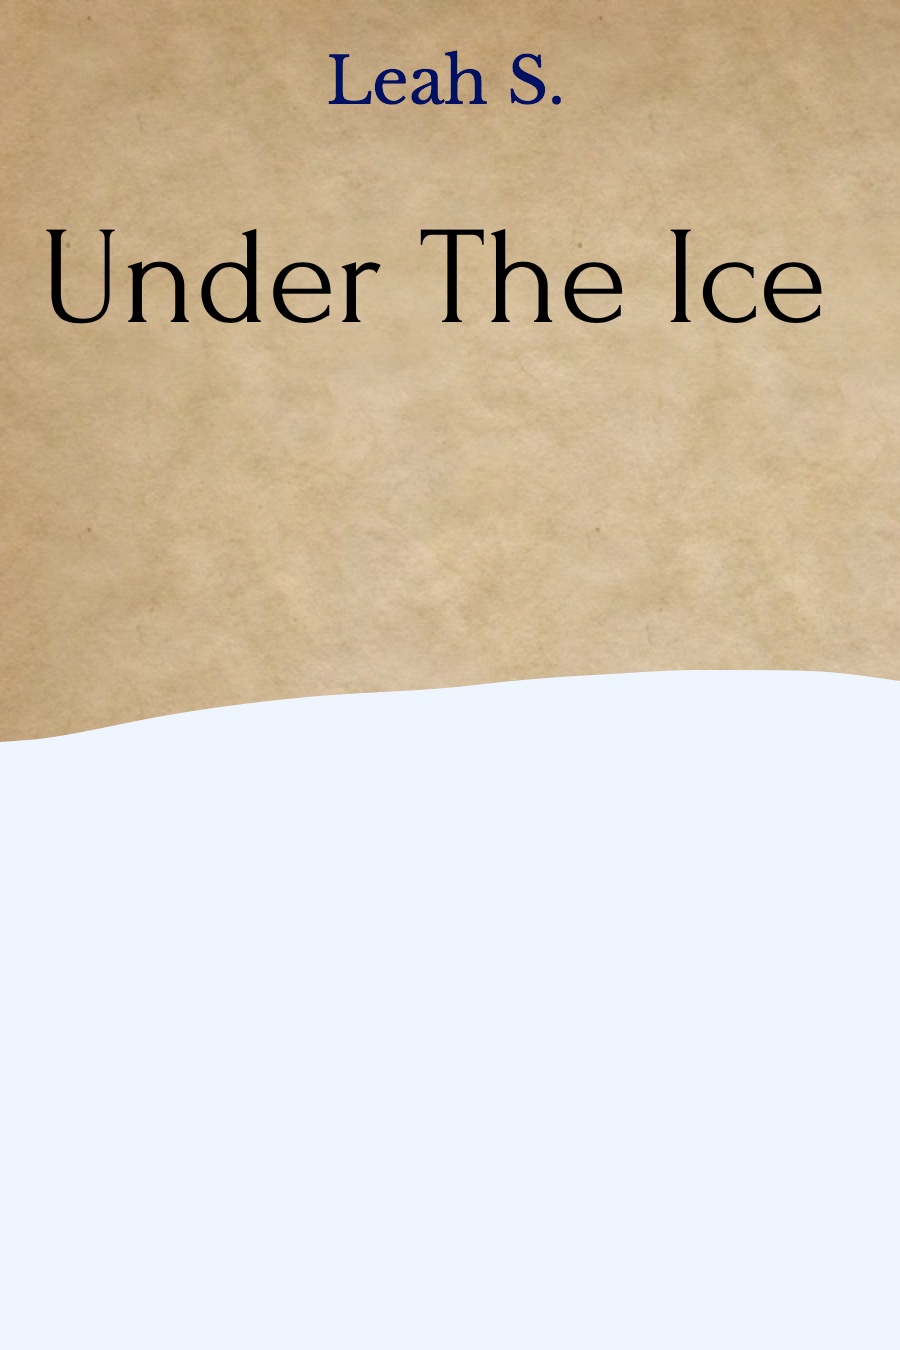 Under the Ice by Leah S